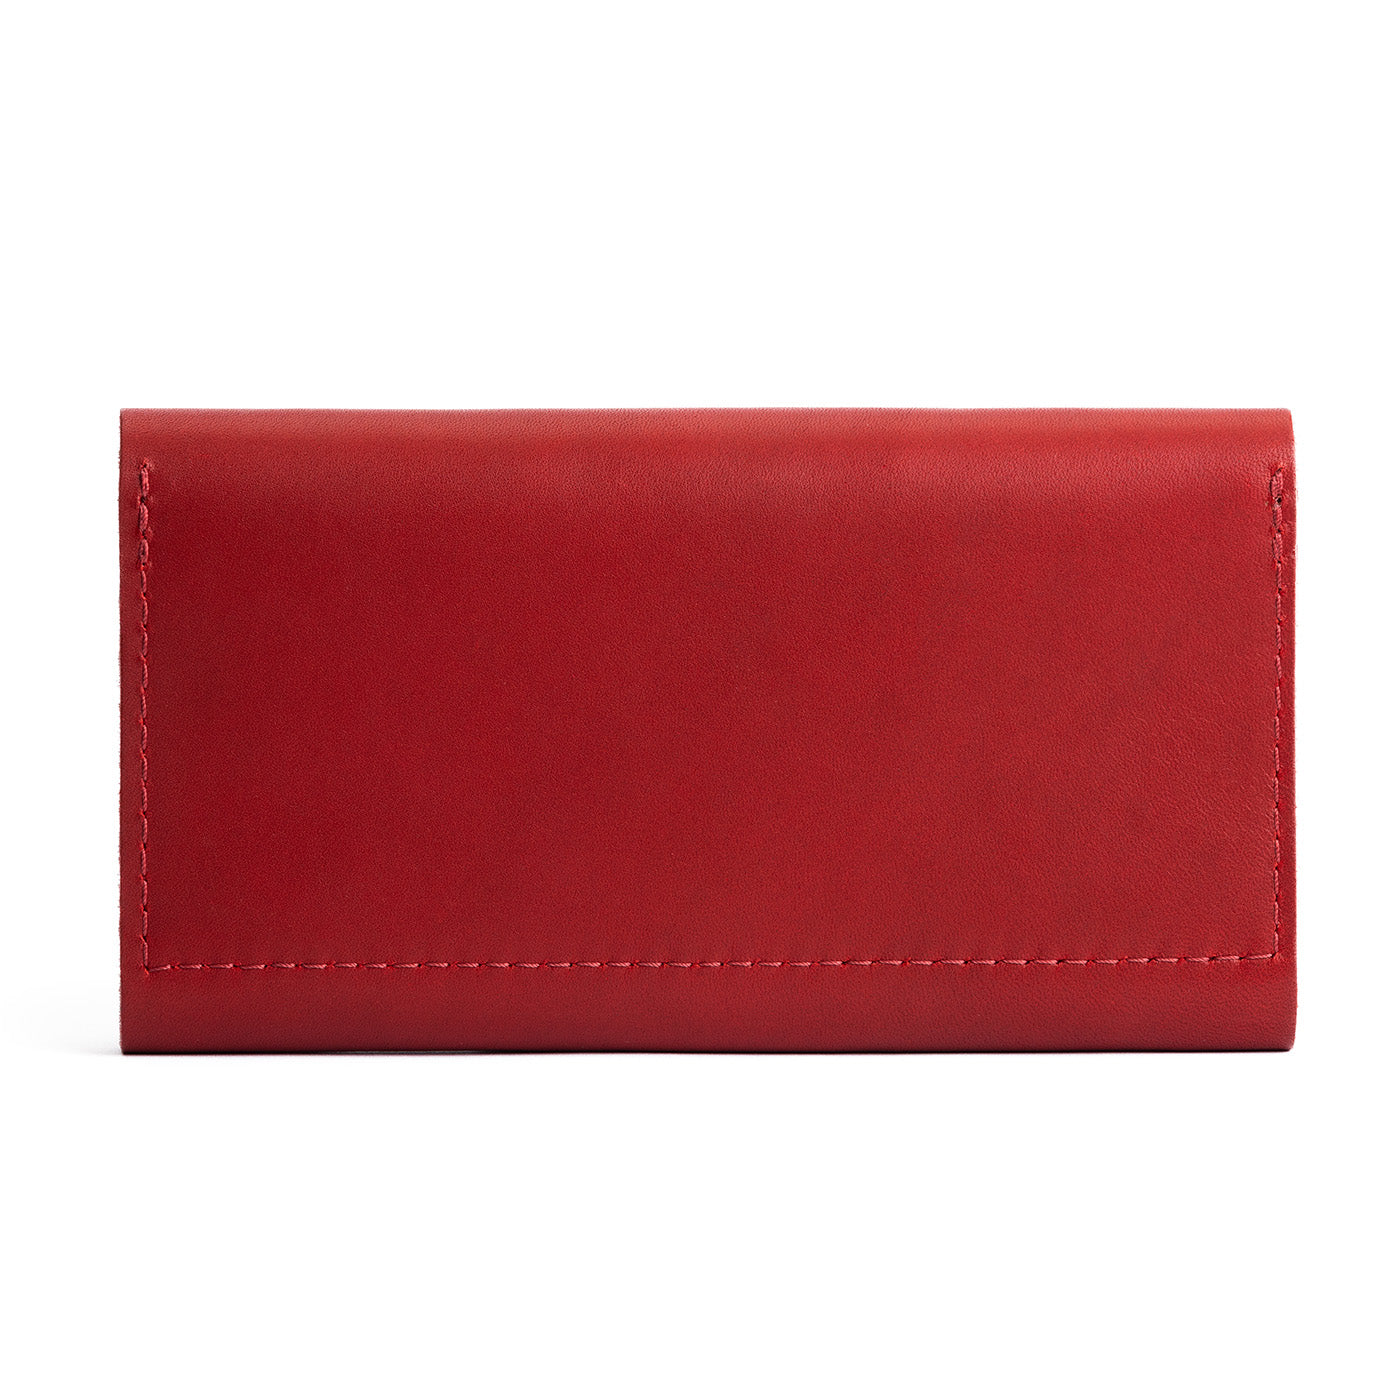 Ruby | Back side of leather wallet